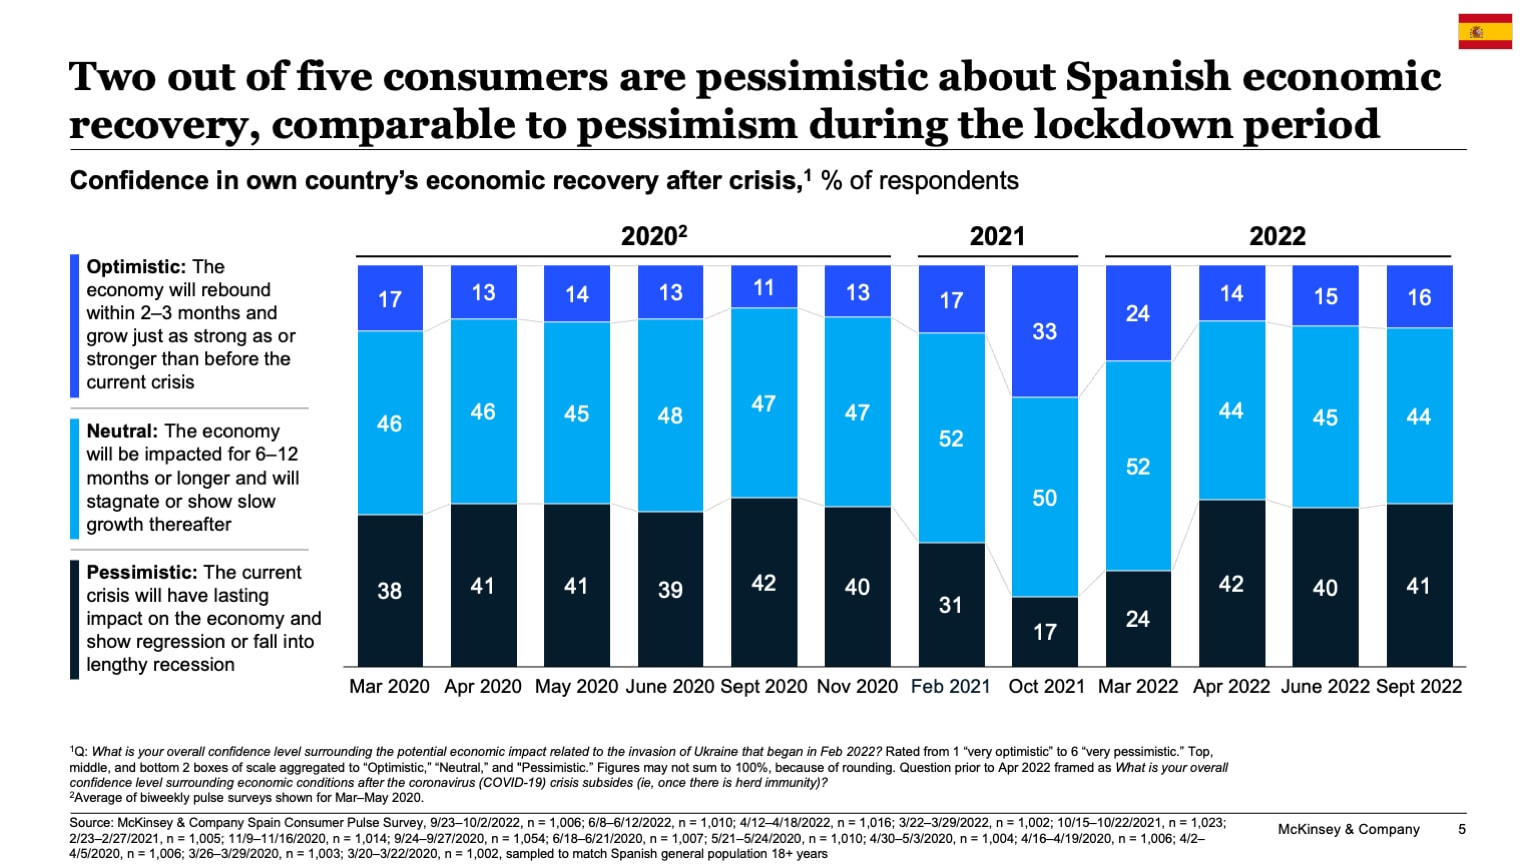 Two out of five consumers are pessimistic about Spanish economic recovery, comparable to pessimism during the lockdown period